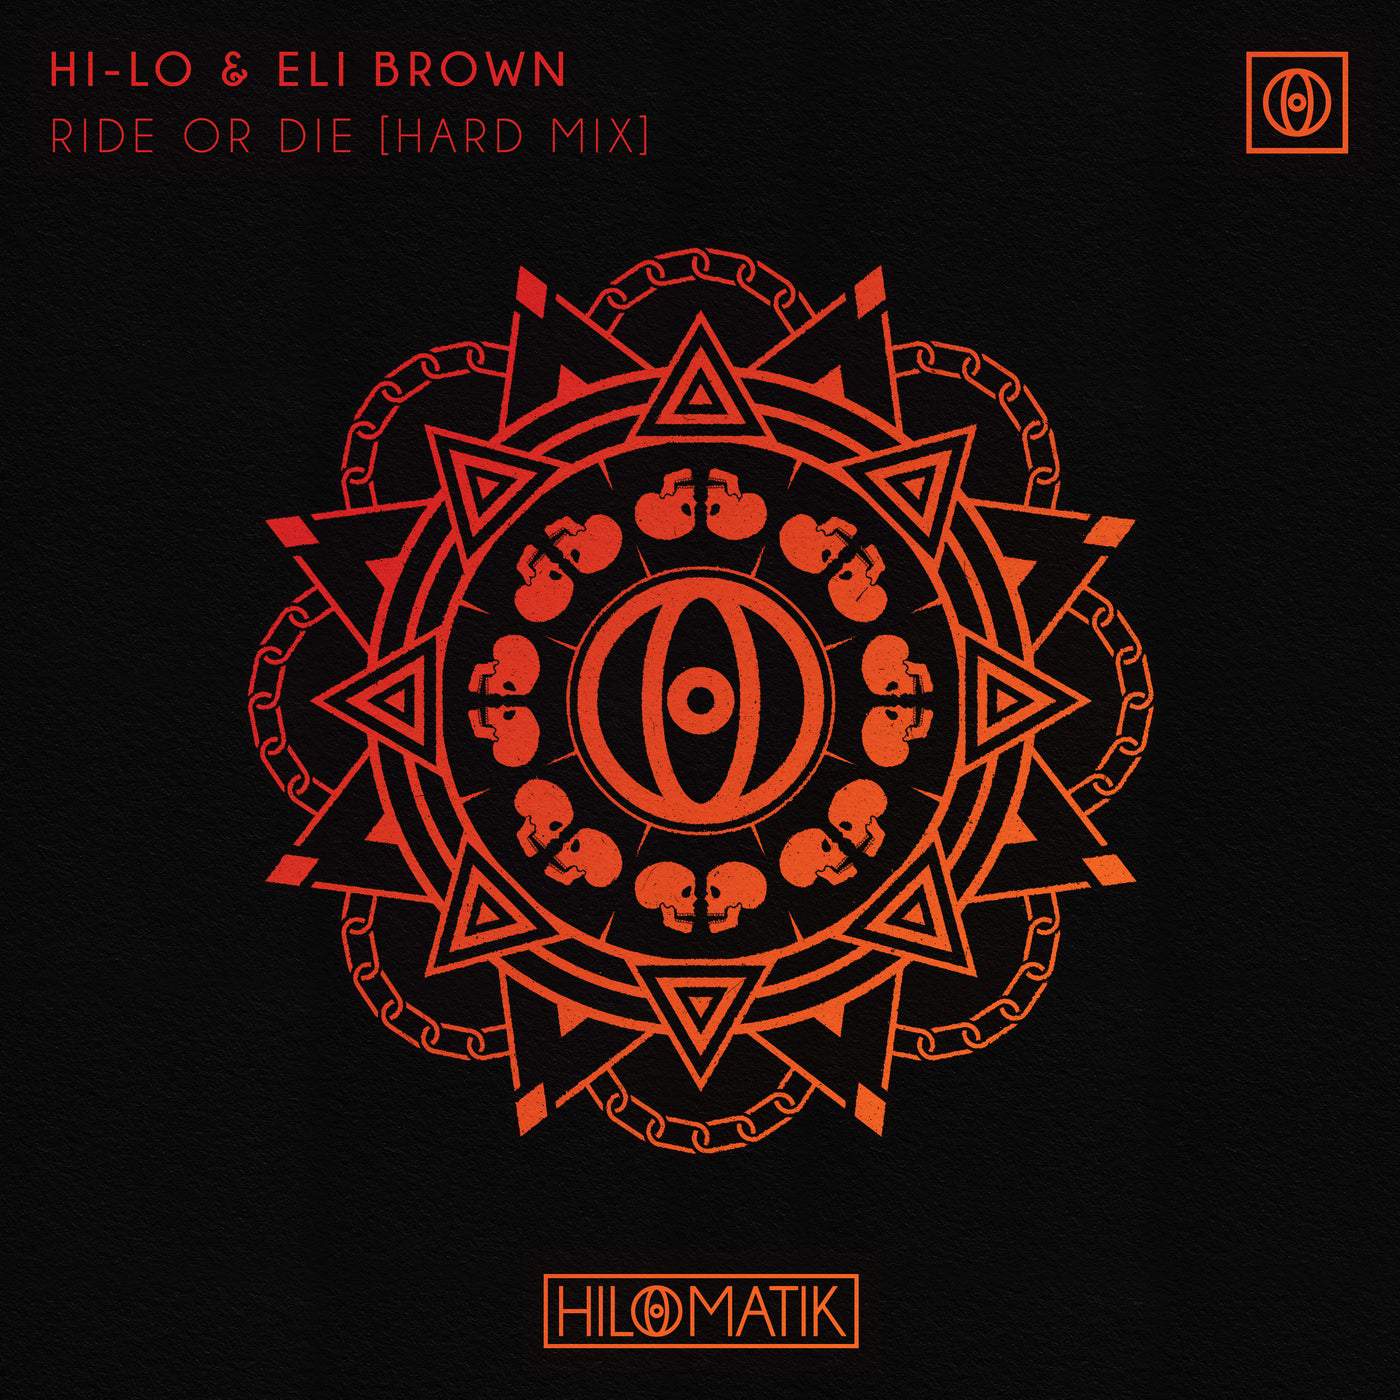 image cover: HI-LO, Eli Brown - RIDE OR DIE (Extended Hard Mix) on HILOMATIK